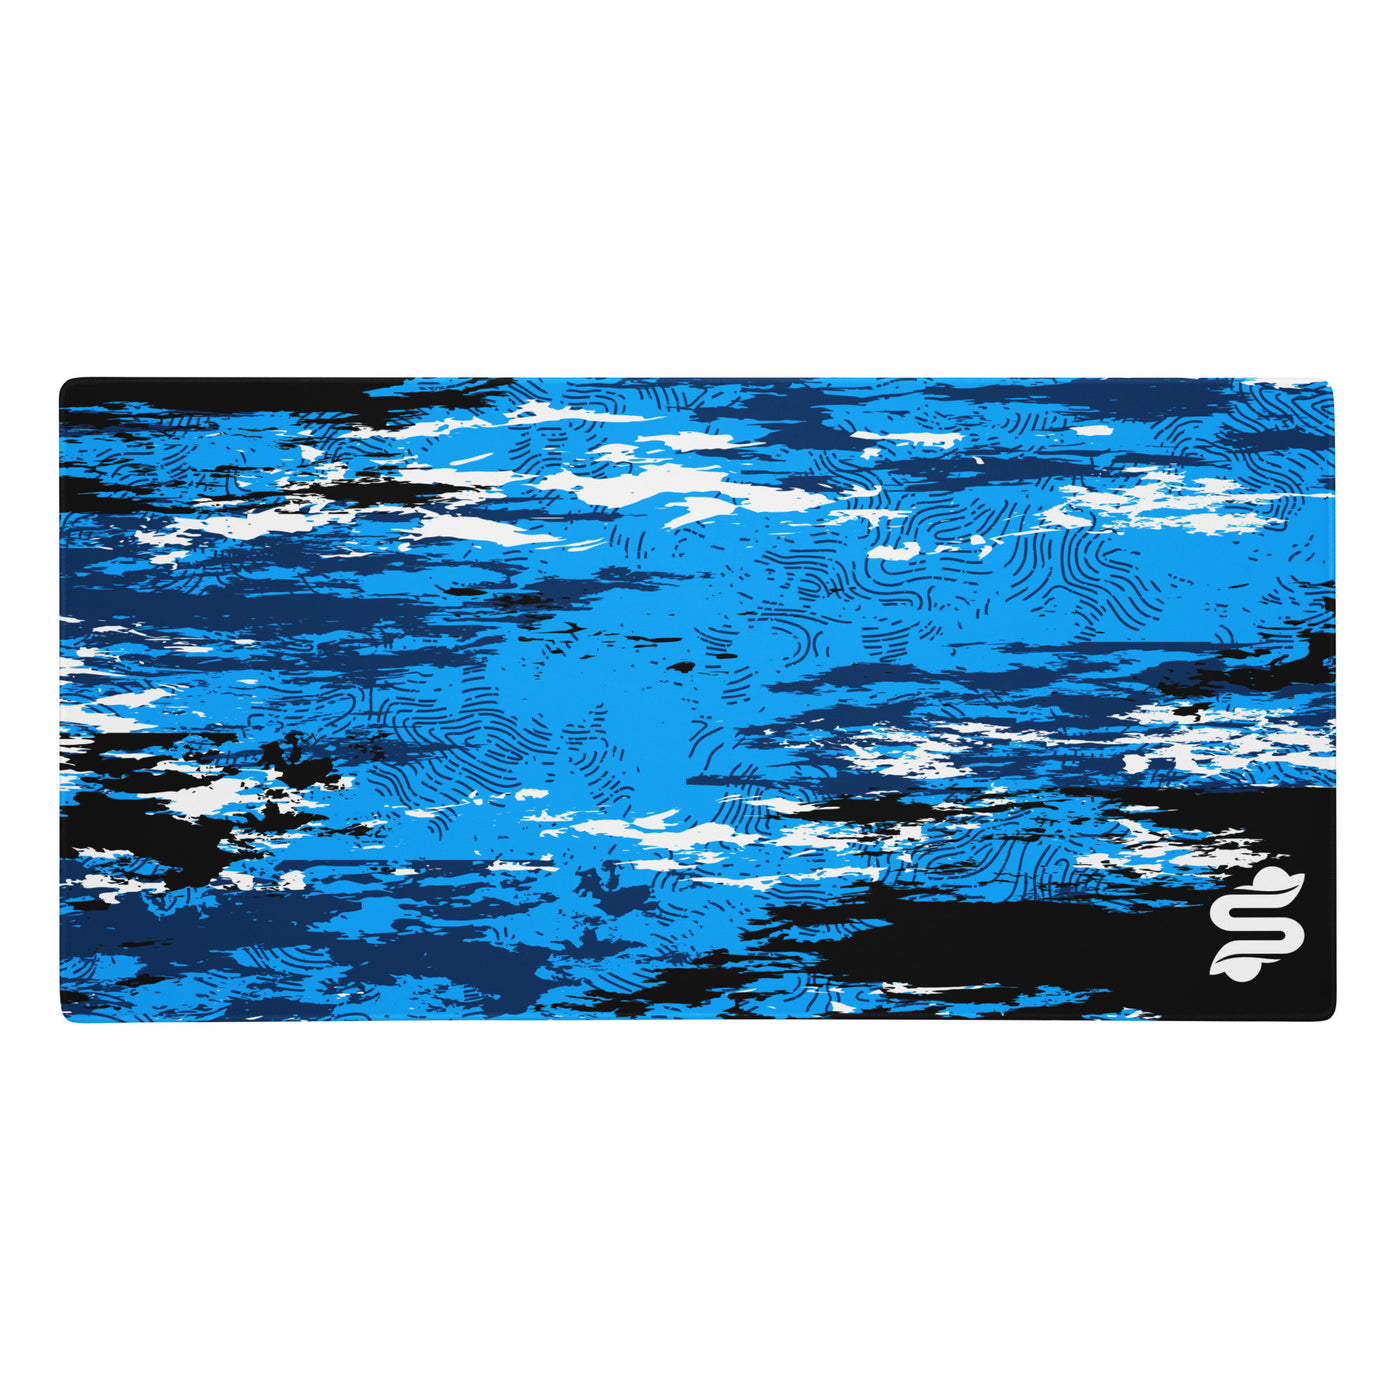 Sky Gaming mouse pad